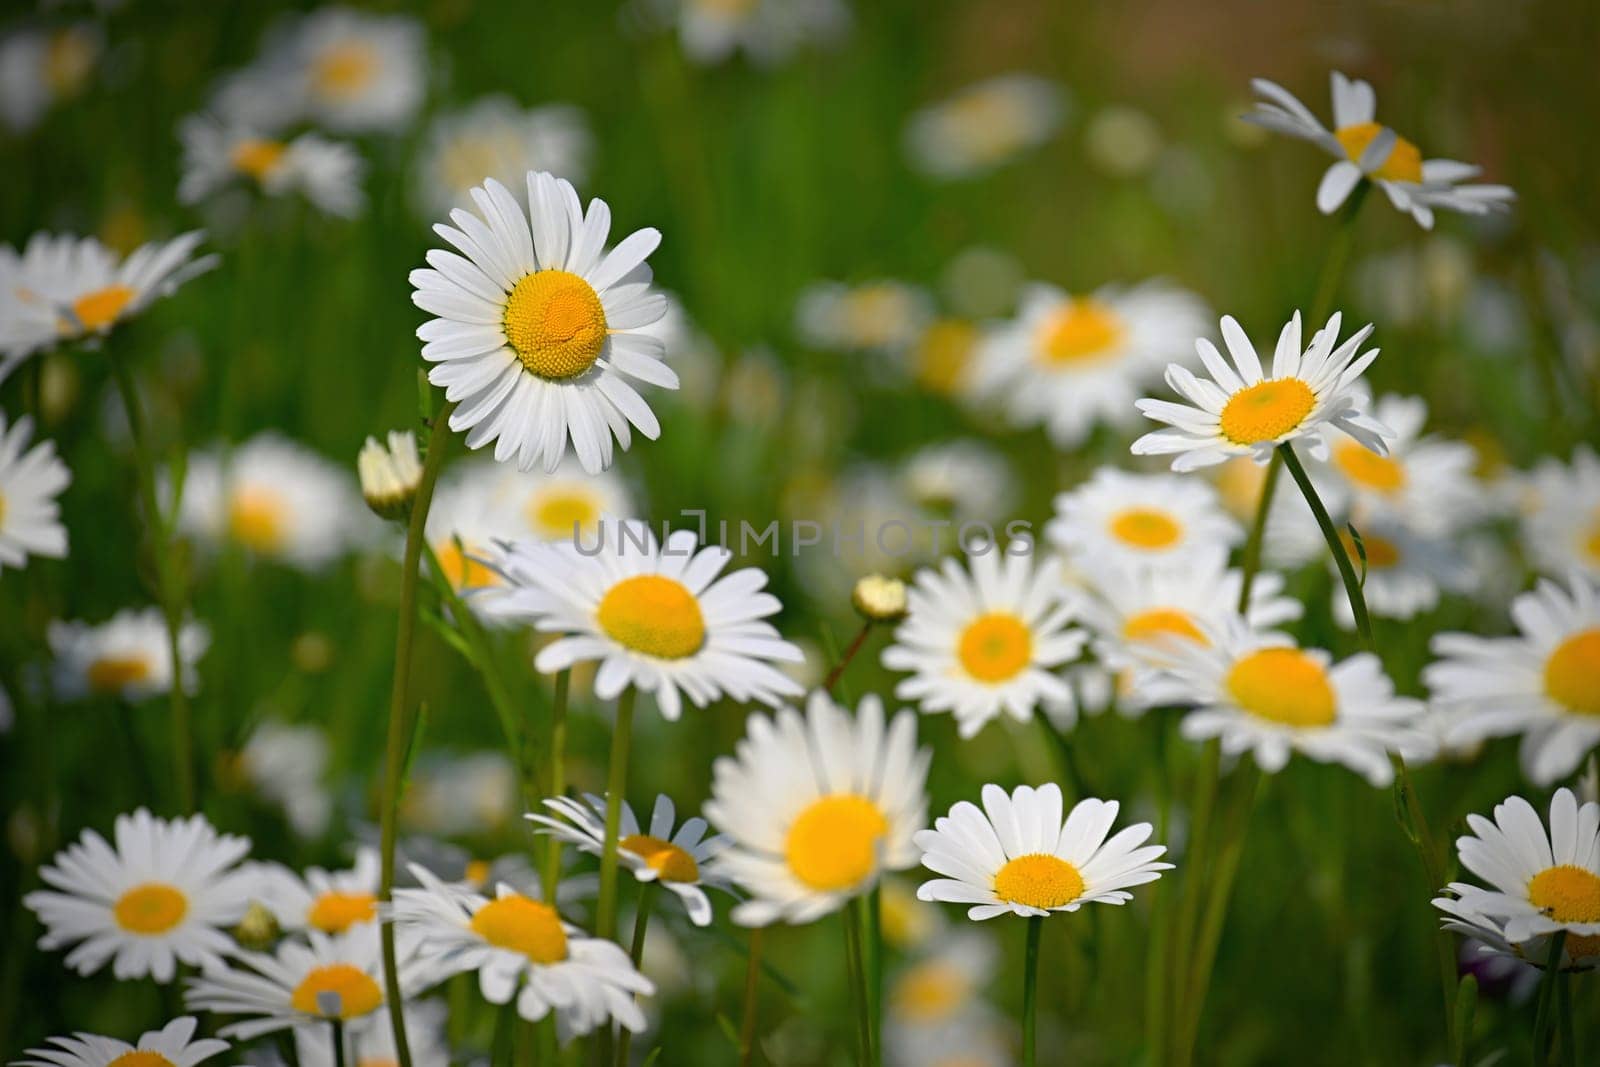 Flowers in the meadow. Beautiful natural background with daisies in spring and sunny day.